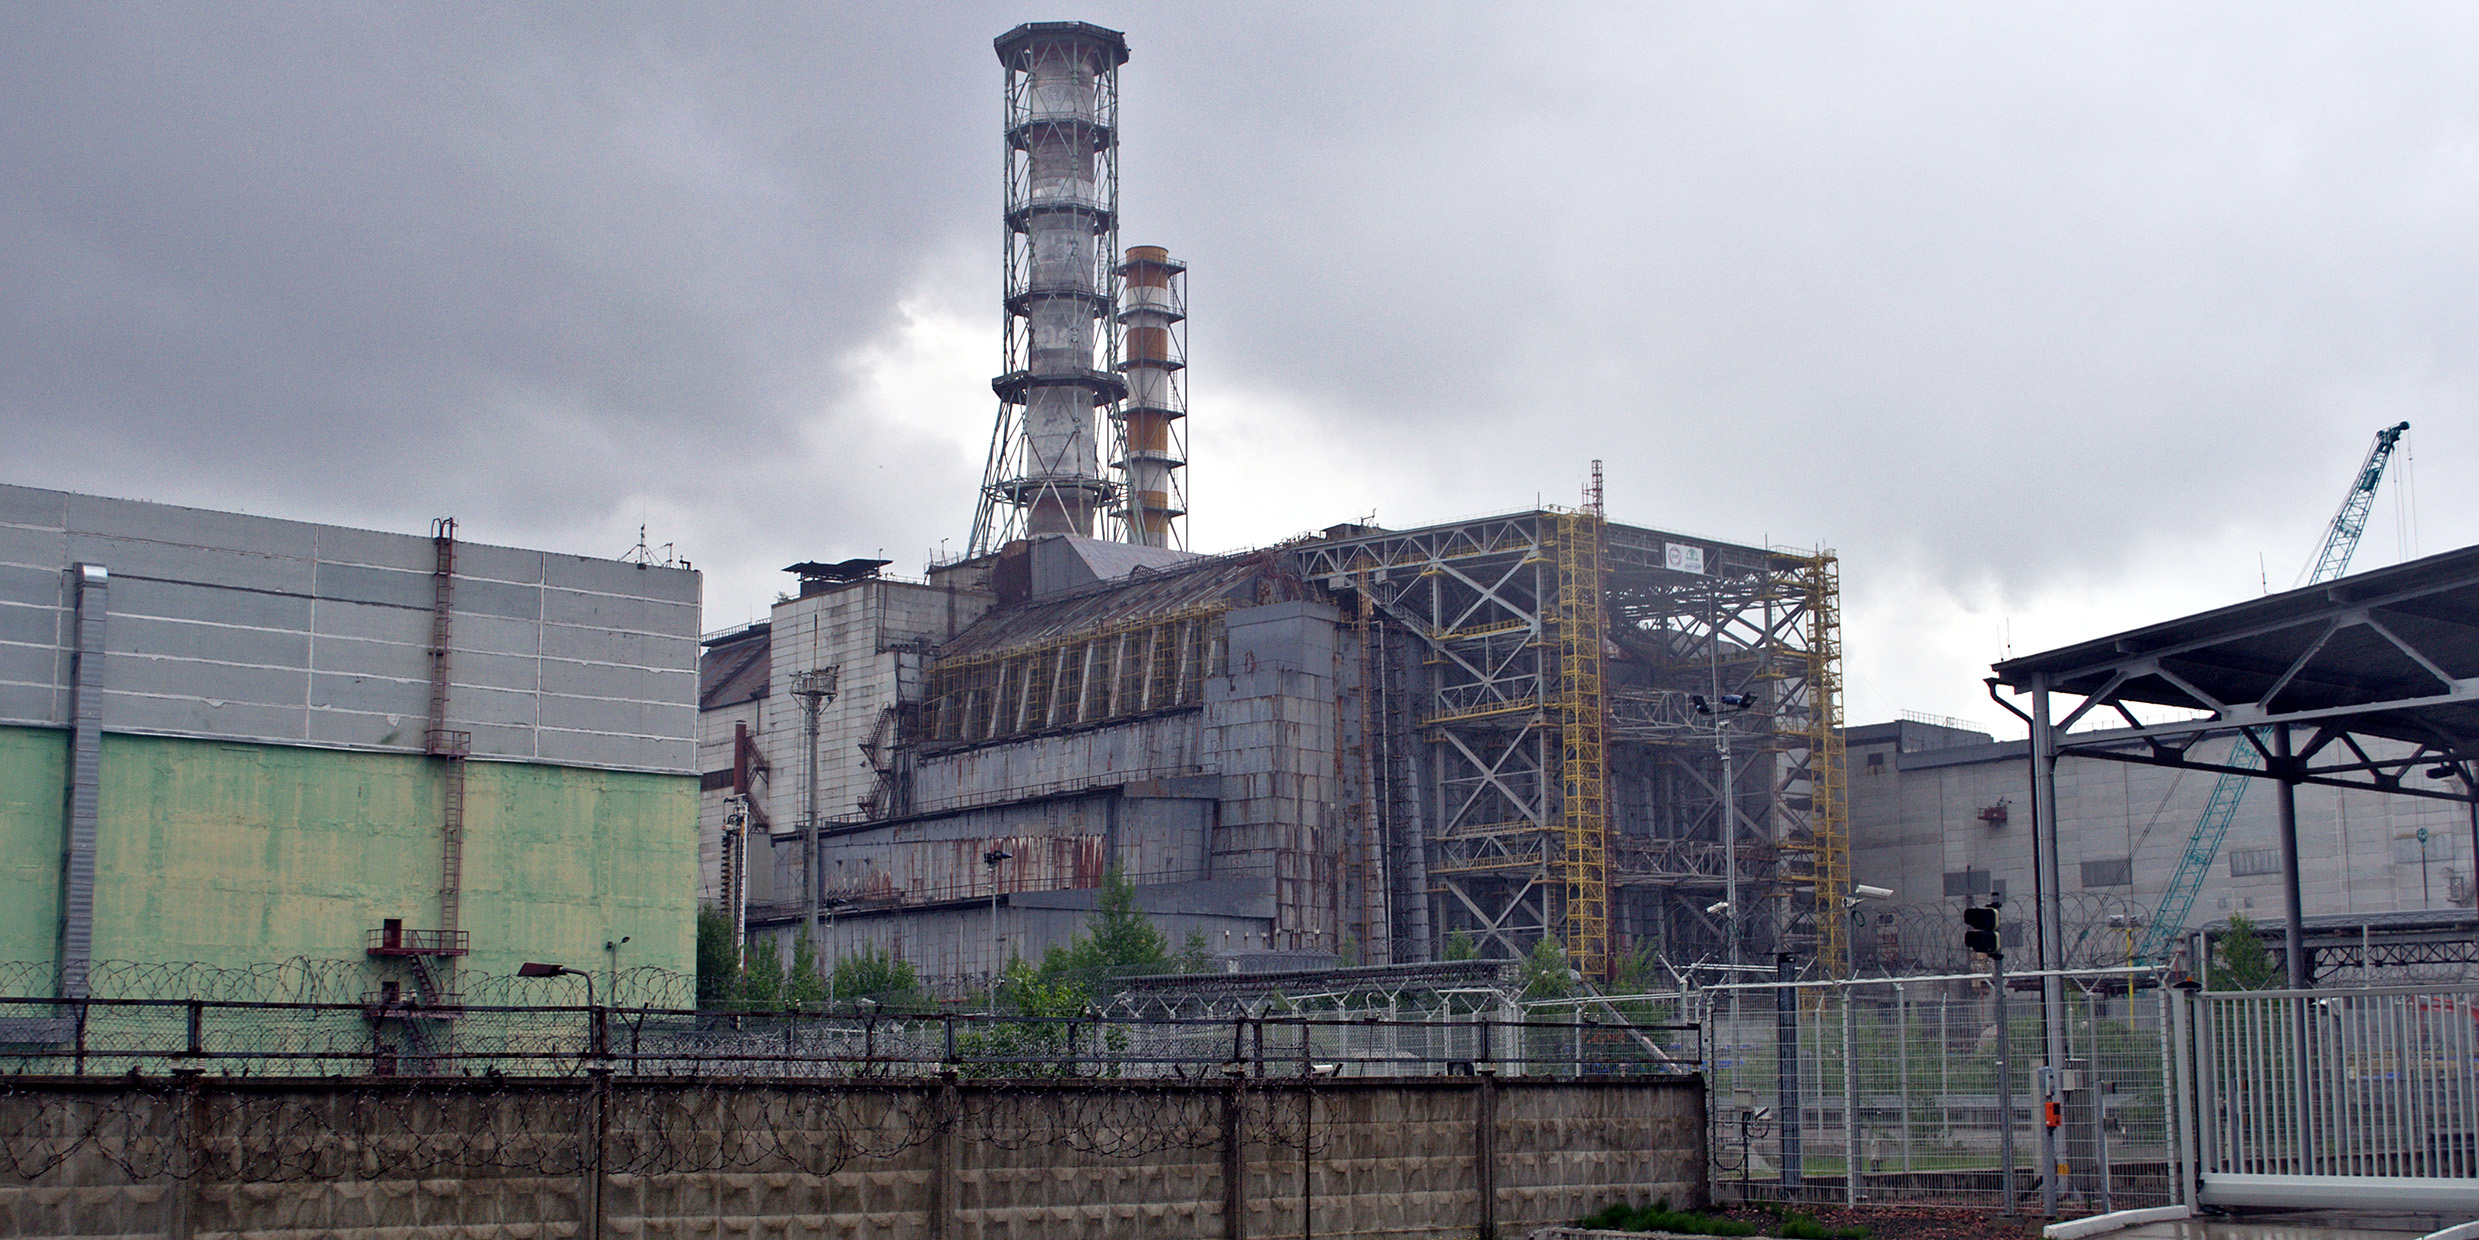 Image of Chernobyl Nuclear Power Station